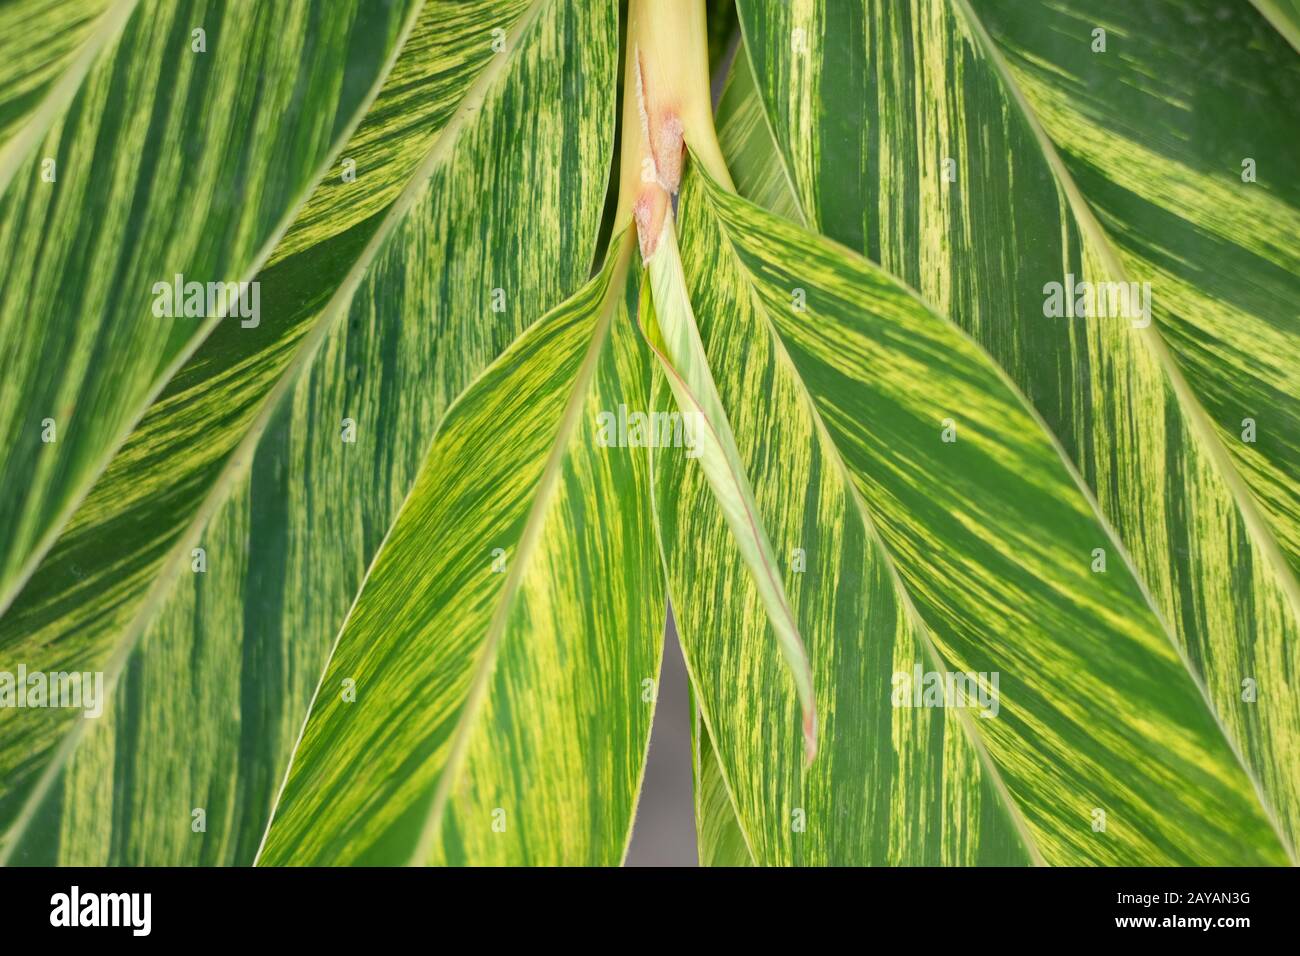 Decorative Floral Pattern Of Leaves Of Ginger Lily Hedychium Gardnerianum Stock Photo Alamy